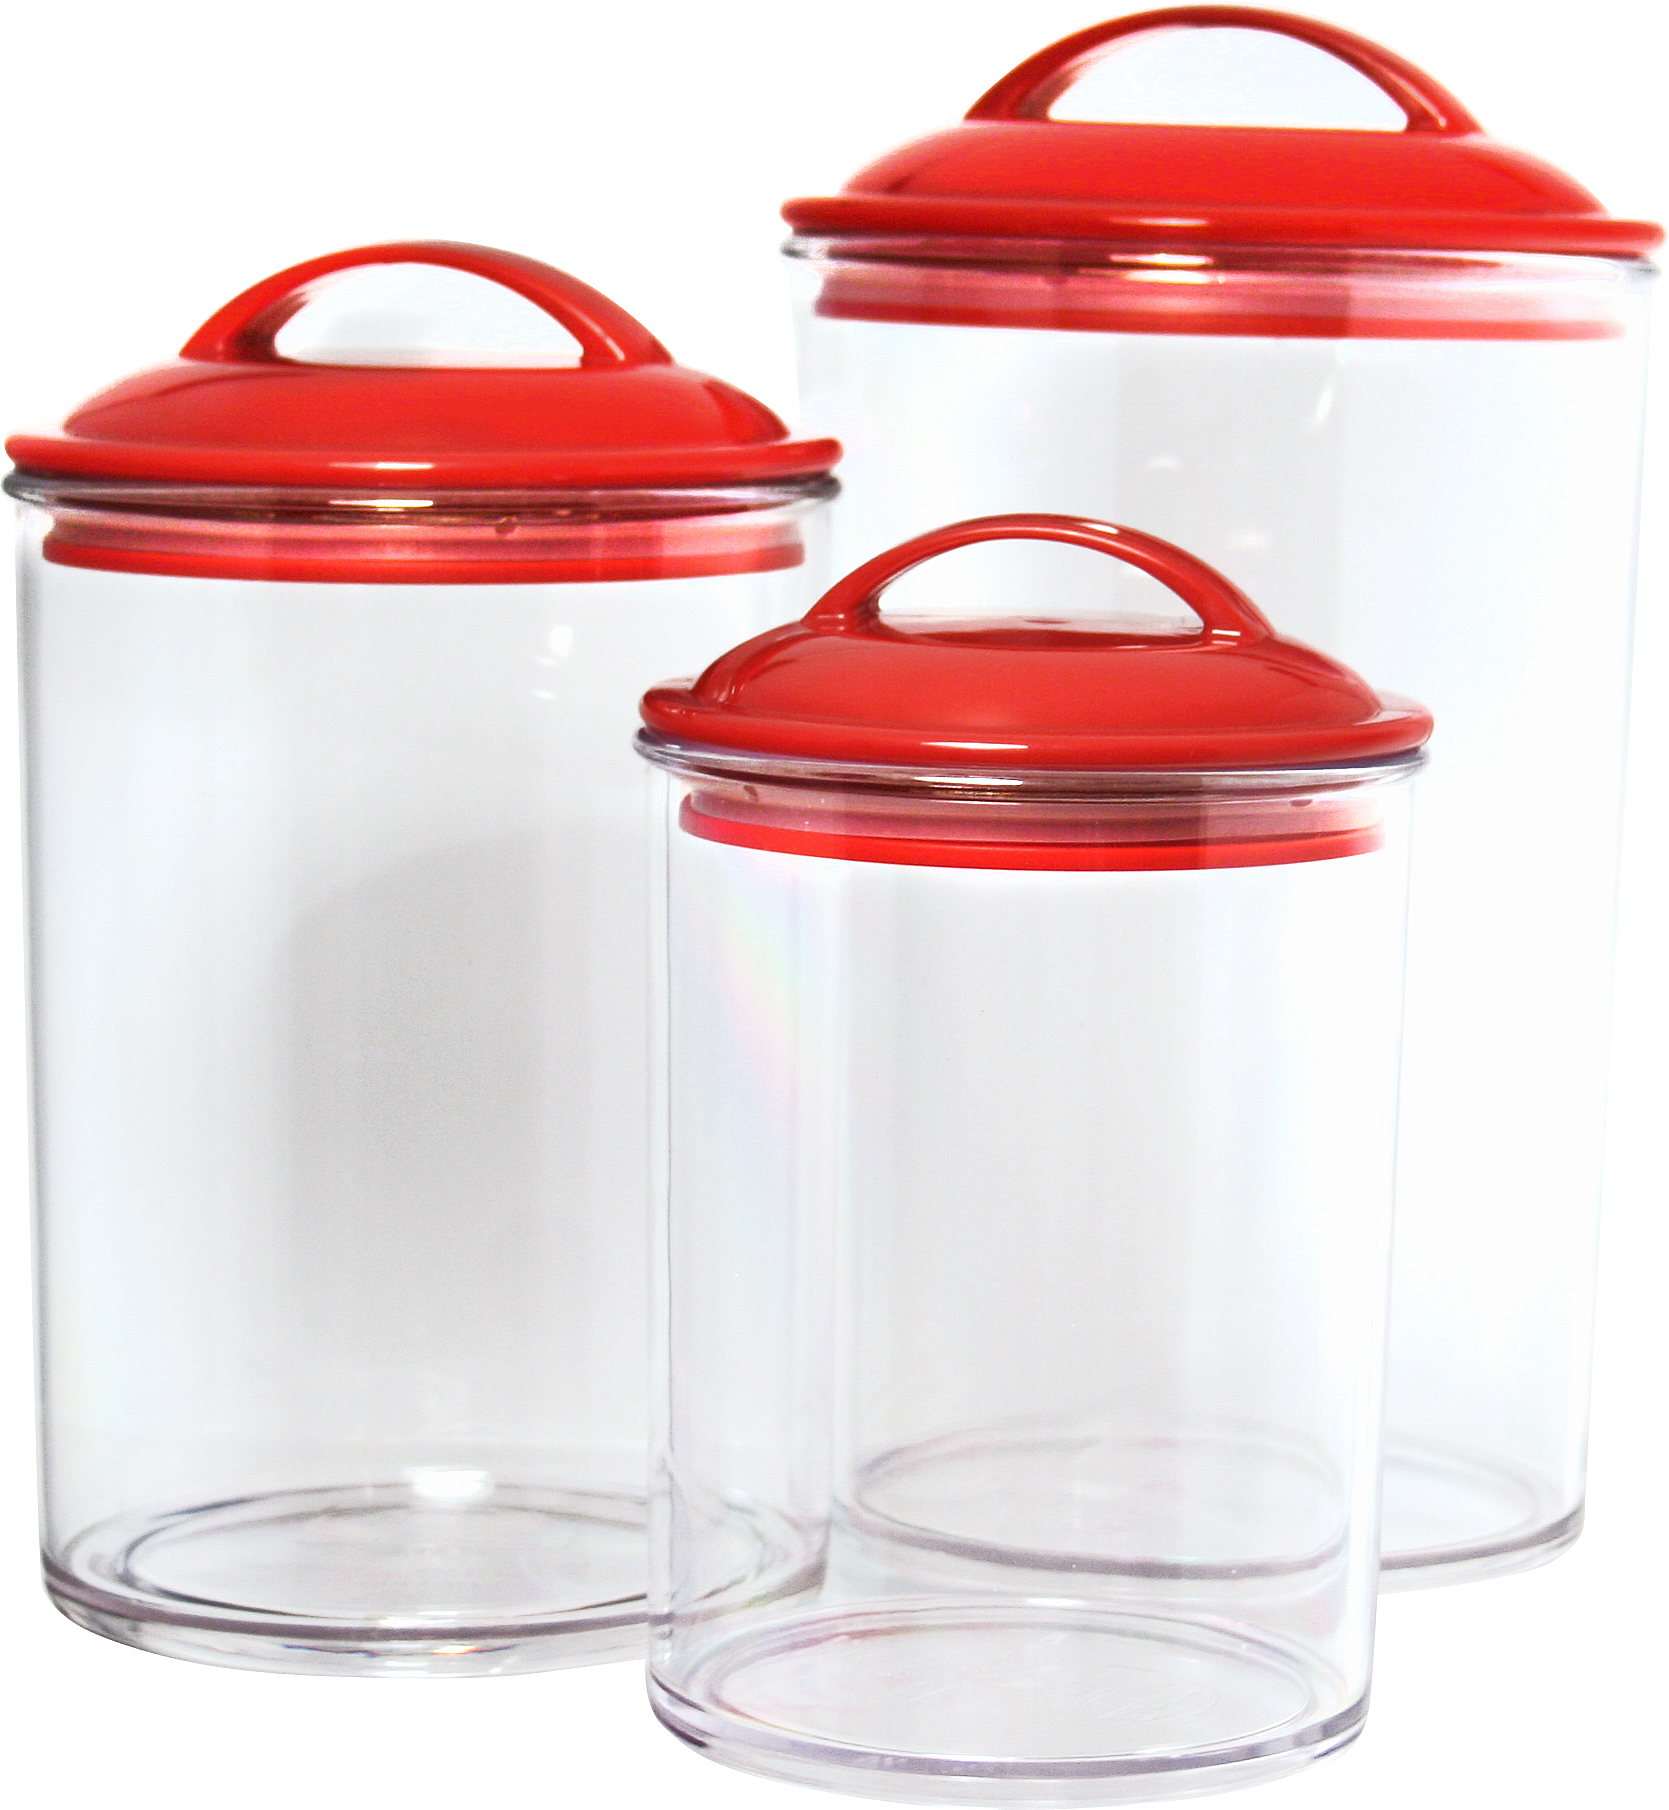 11160 3pc Acrylic Canister Set Red